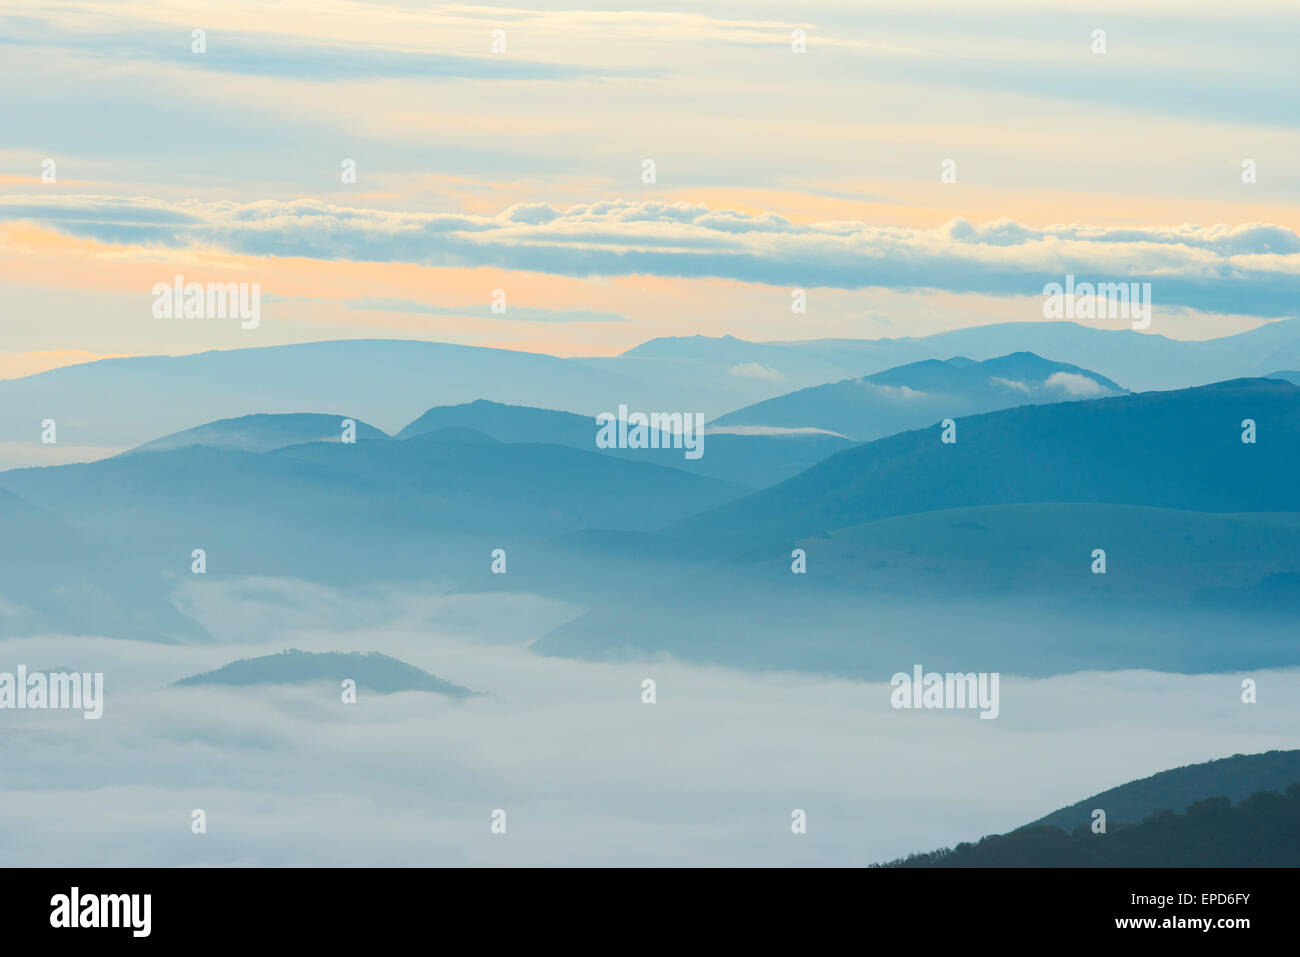 Silhouette of mountains at sunrise, Apennines, Umbria, Italy Stock Photo